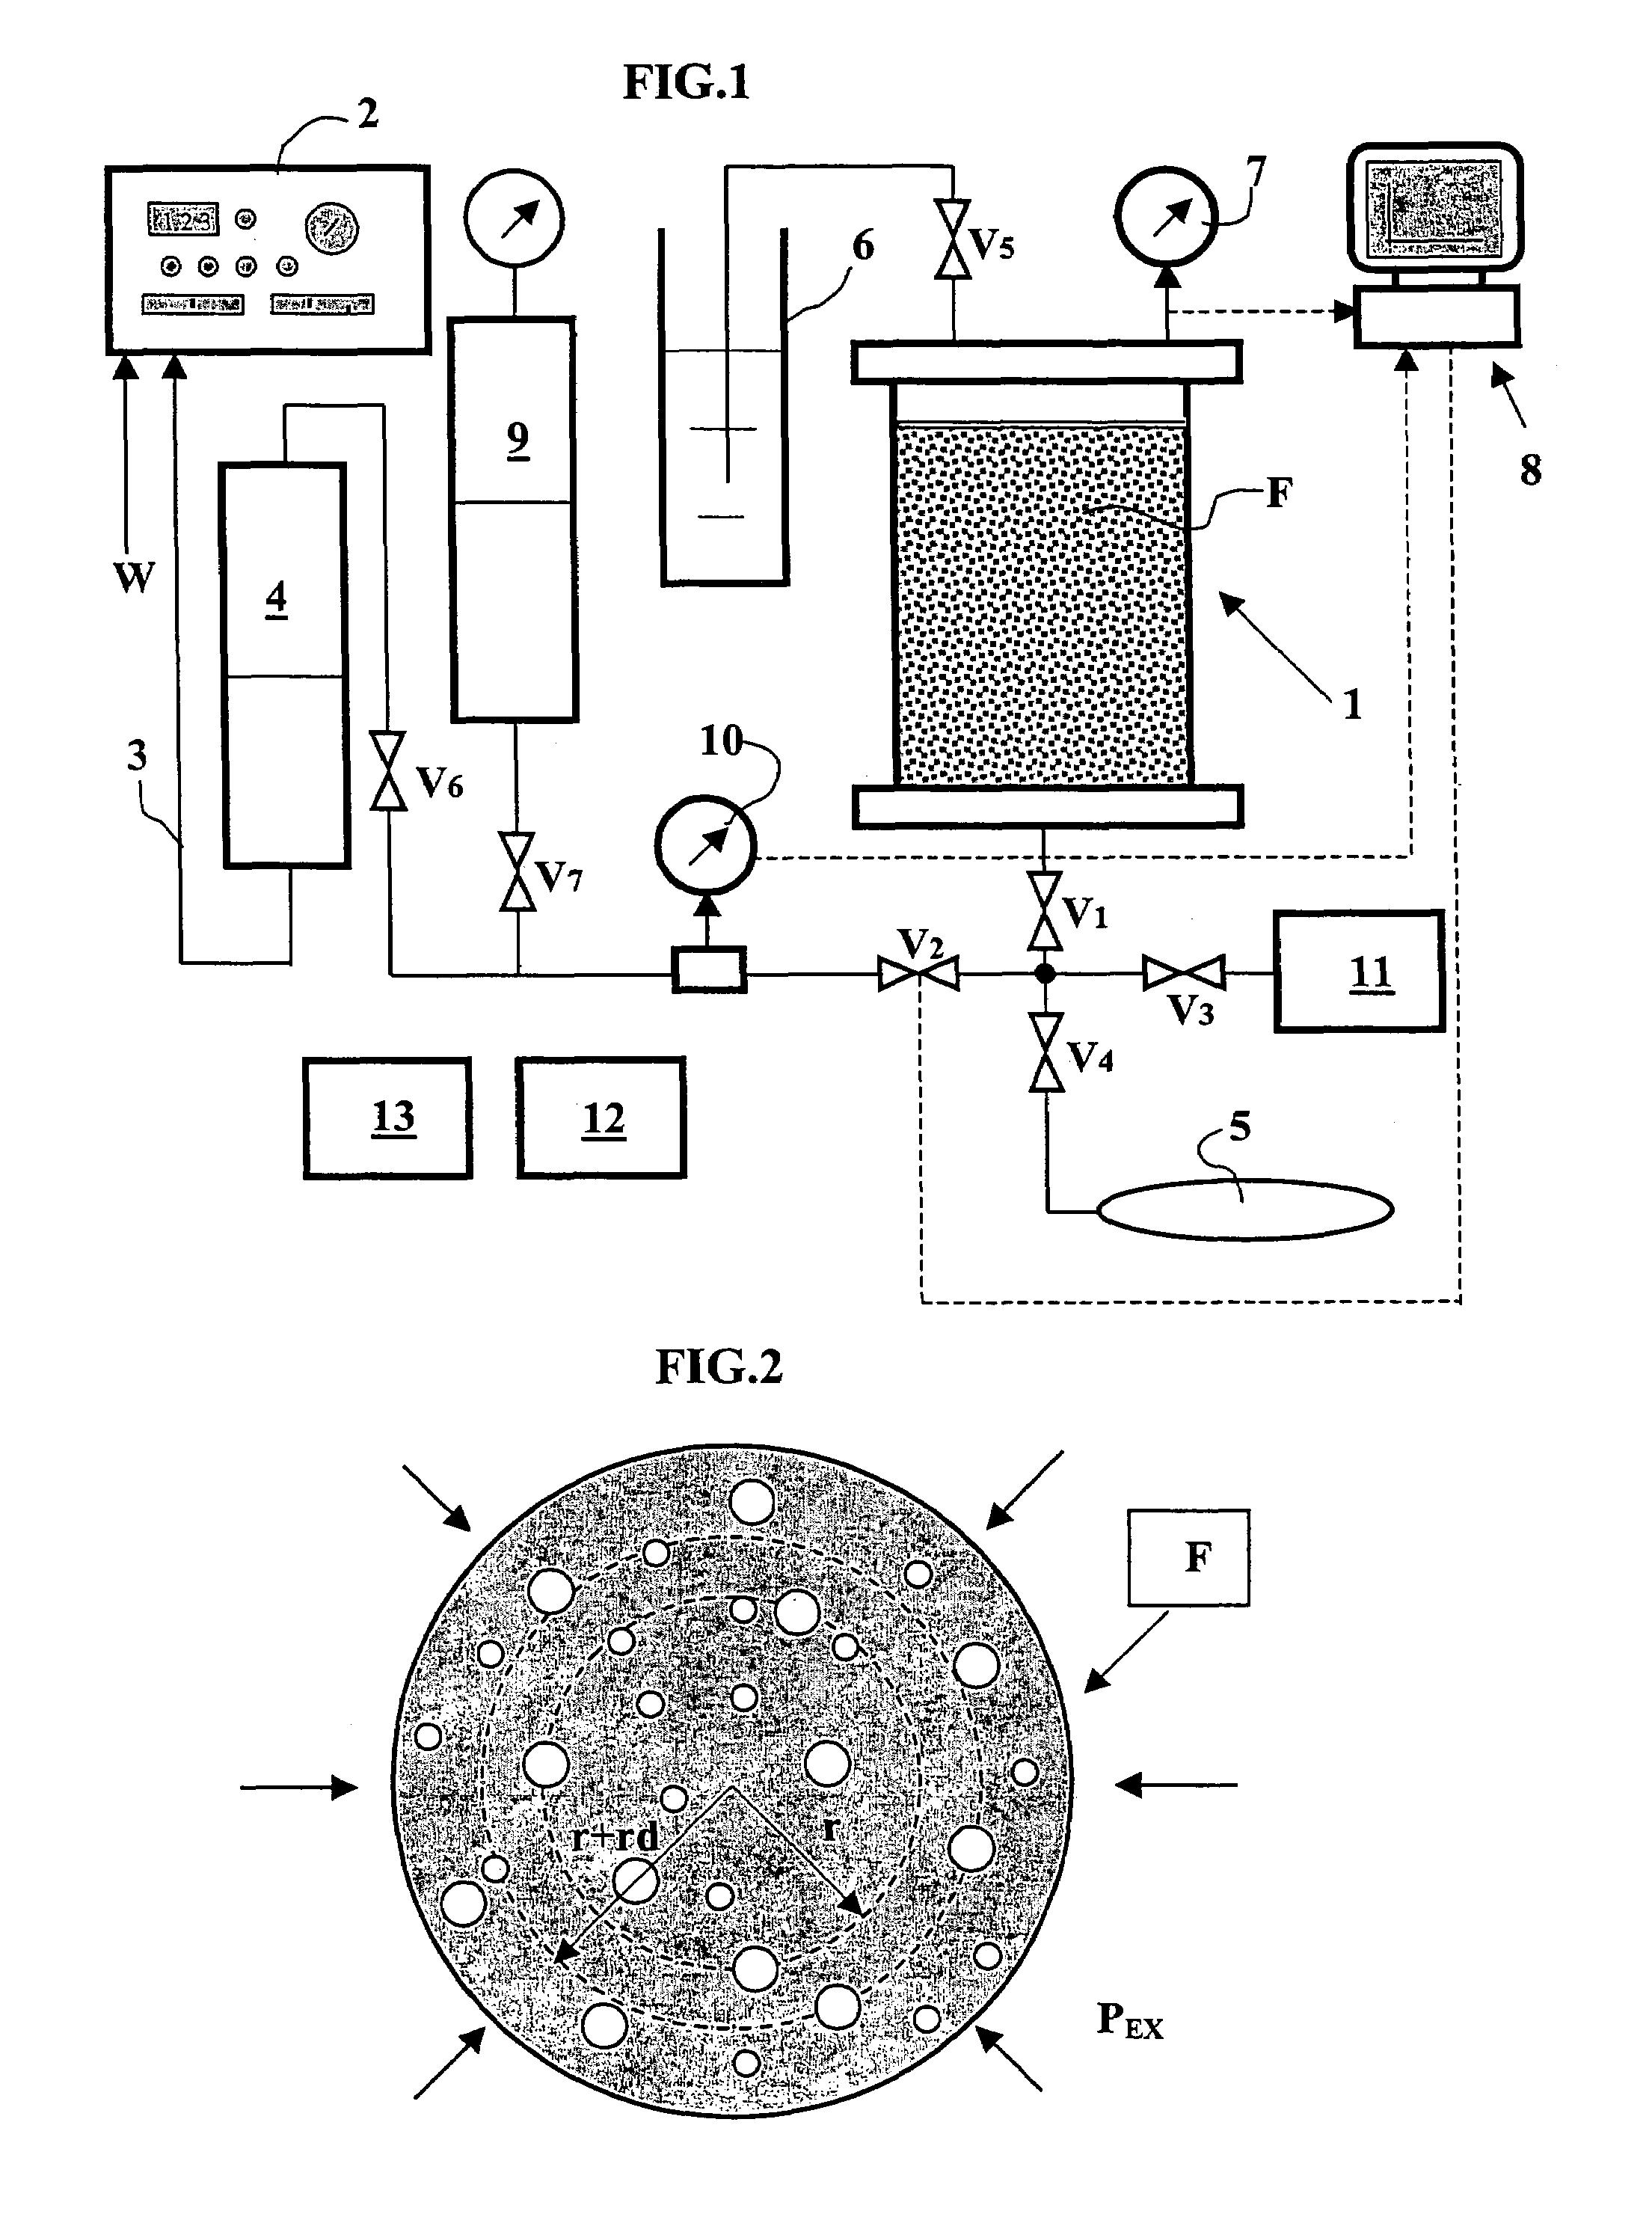 Method and device for evaluating physical parameters of an underground deposit from rock cuttings sampled therein